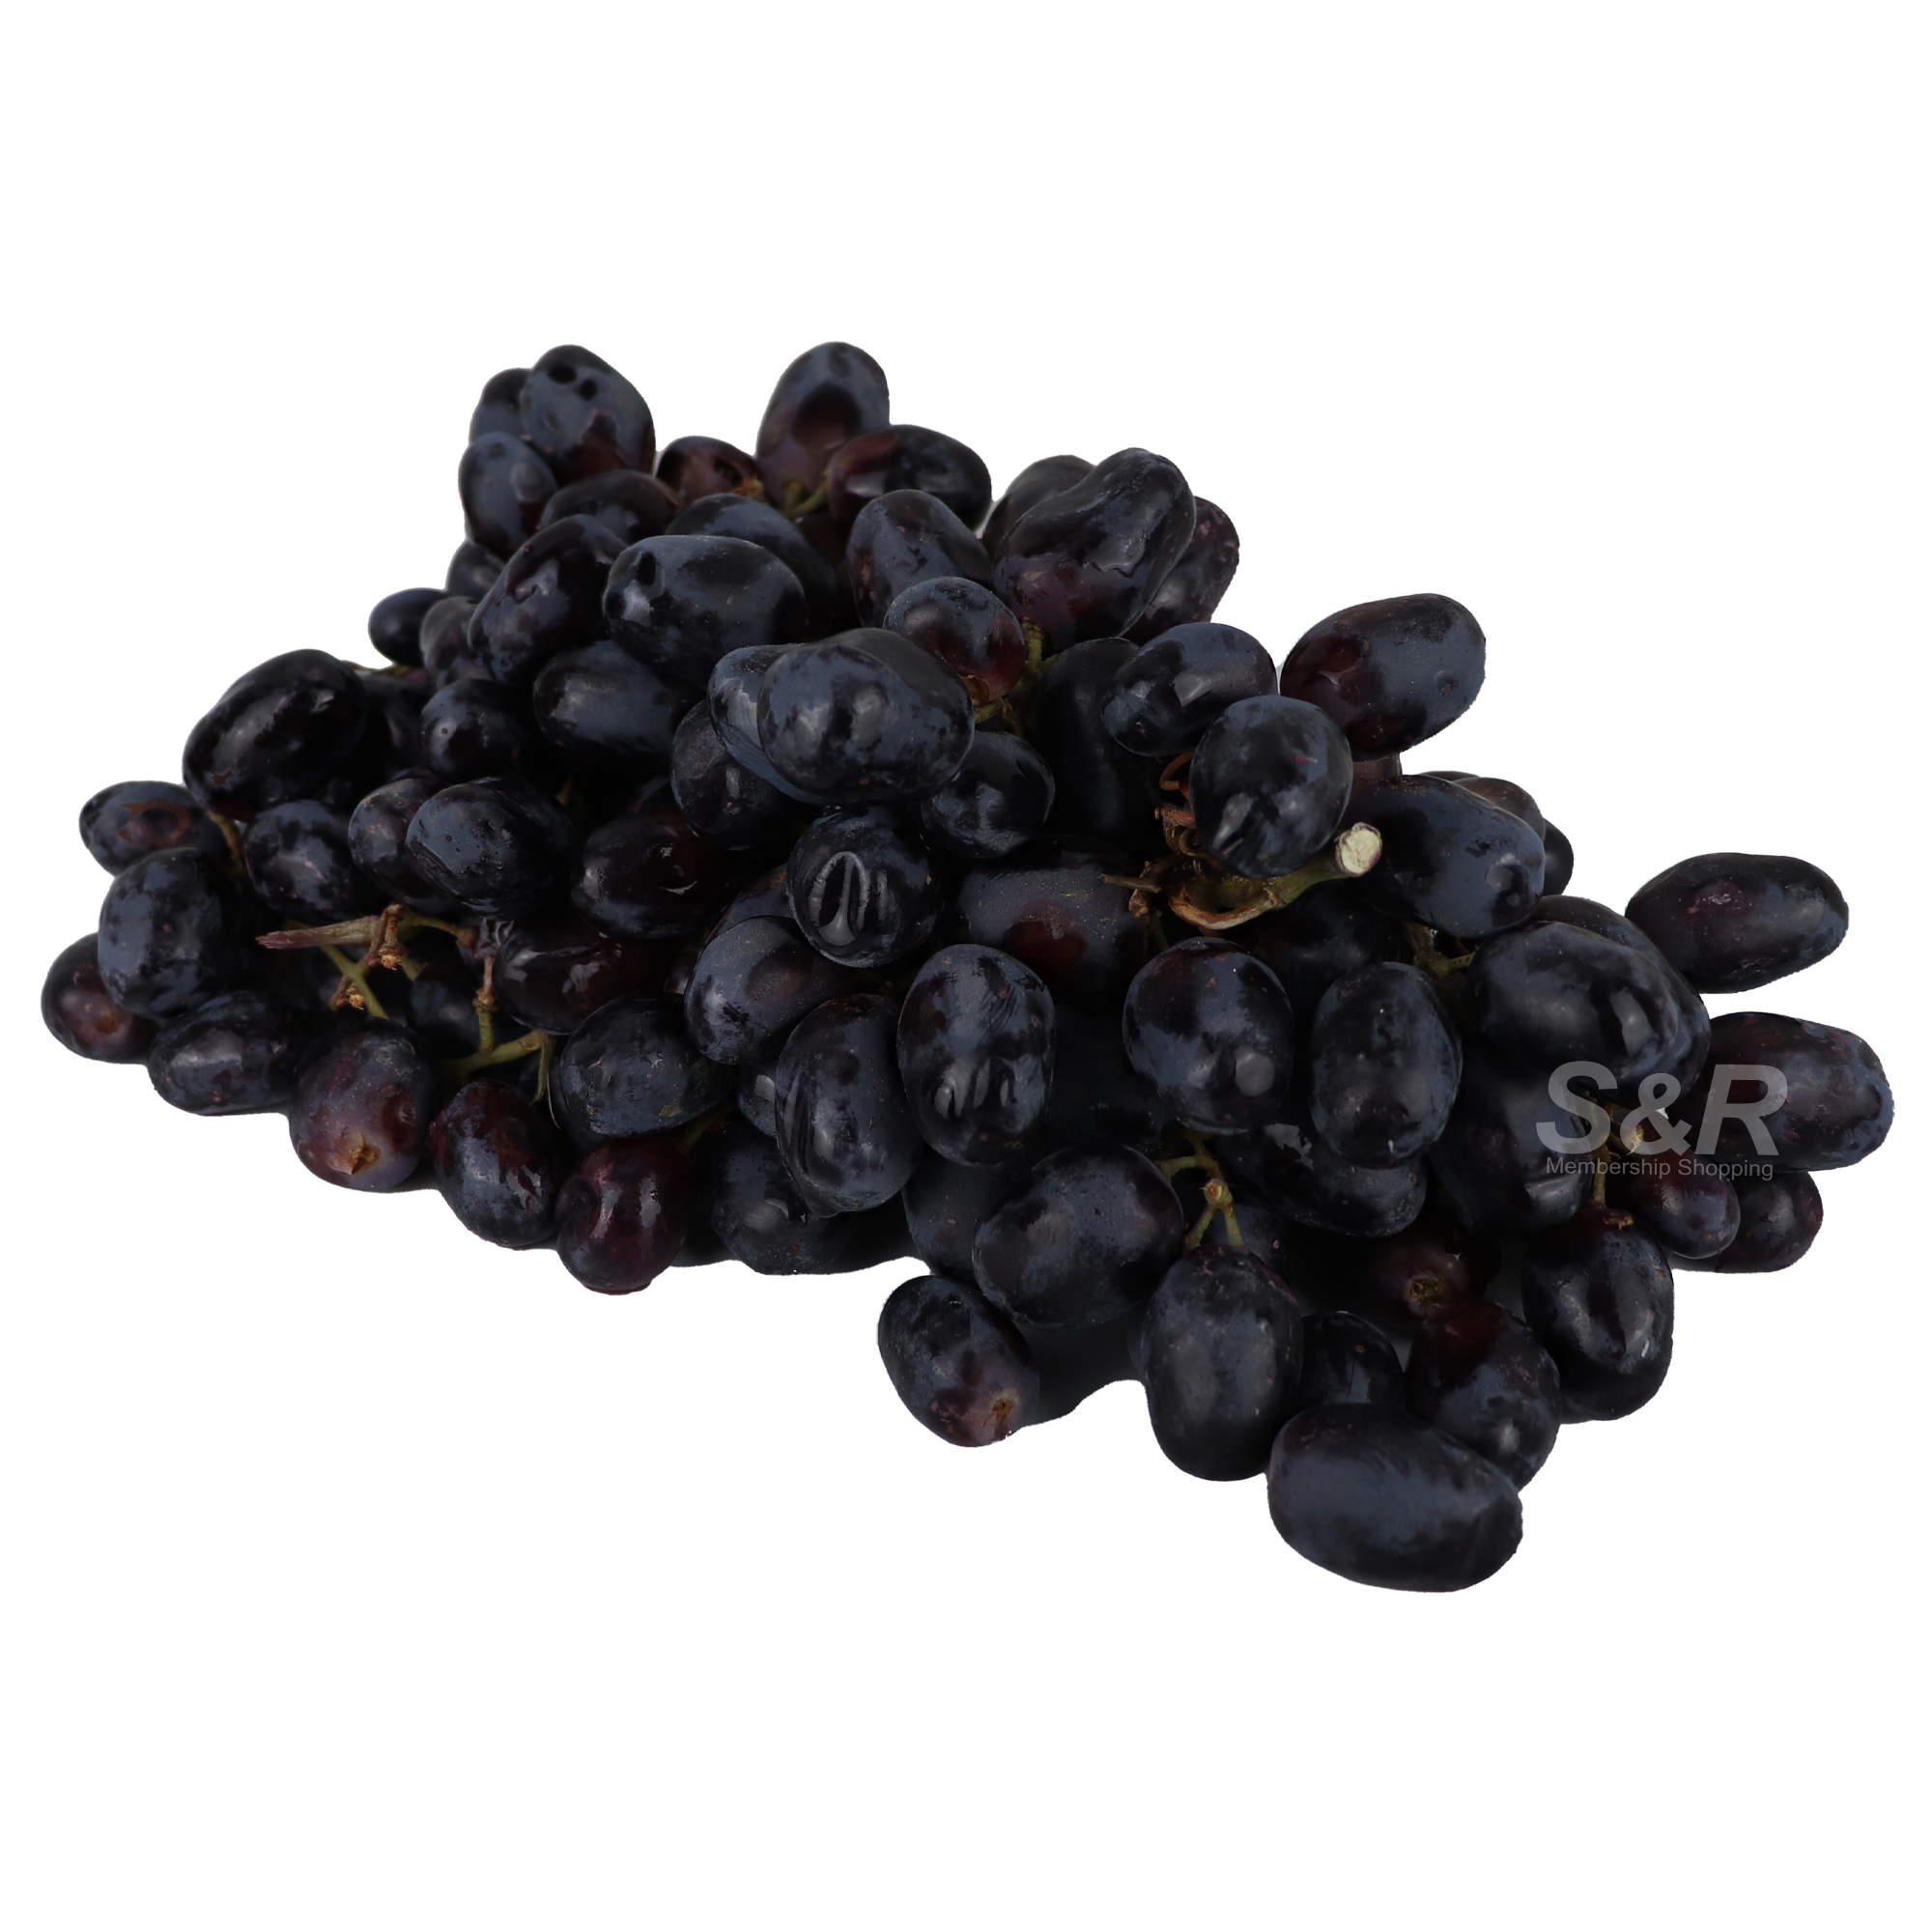 S&R Black Grapes approx. 1.3kg